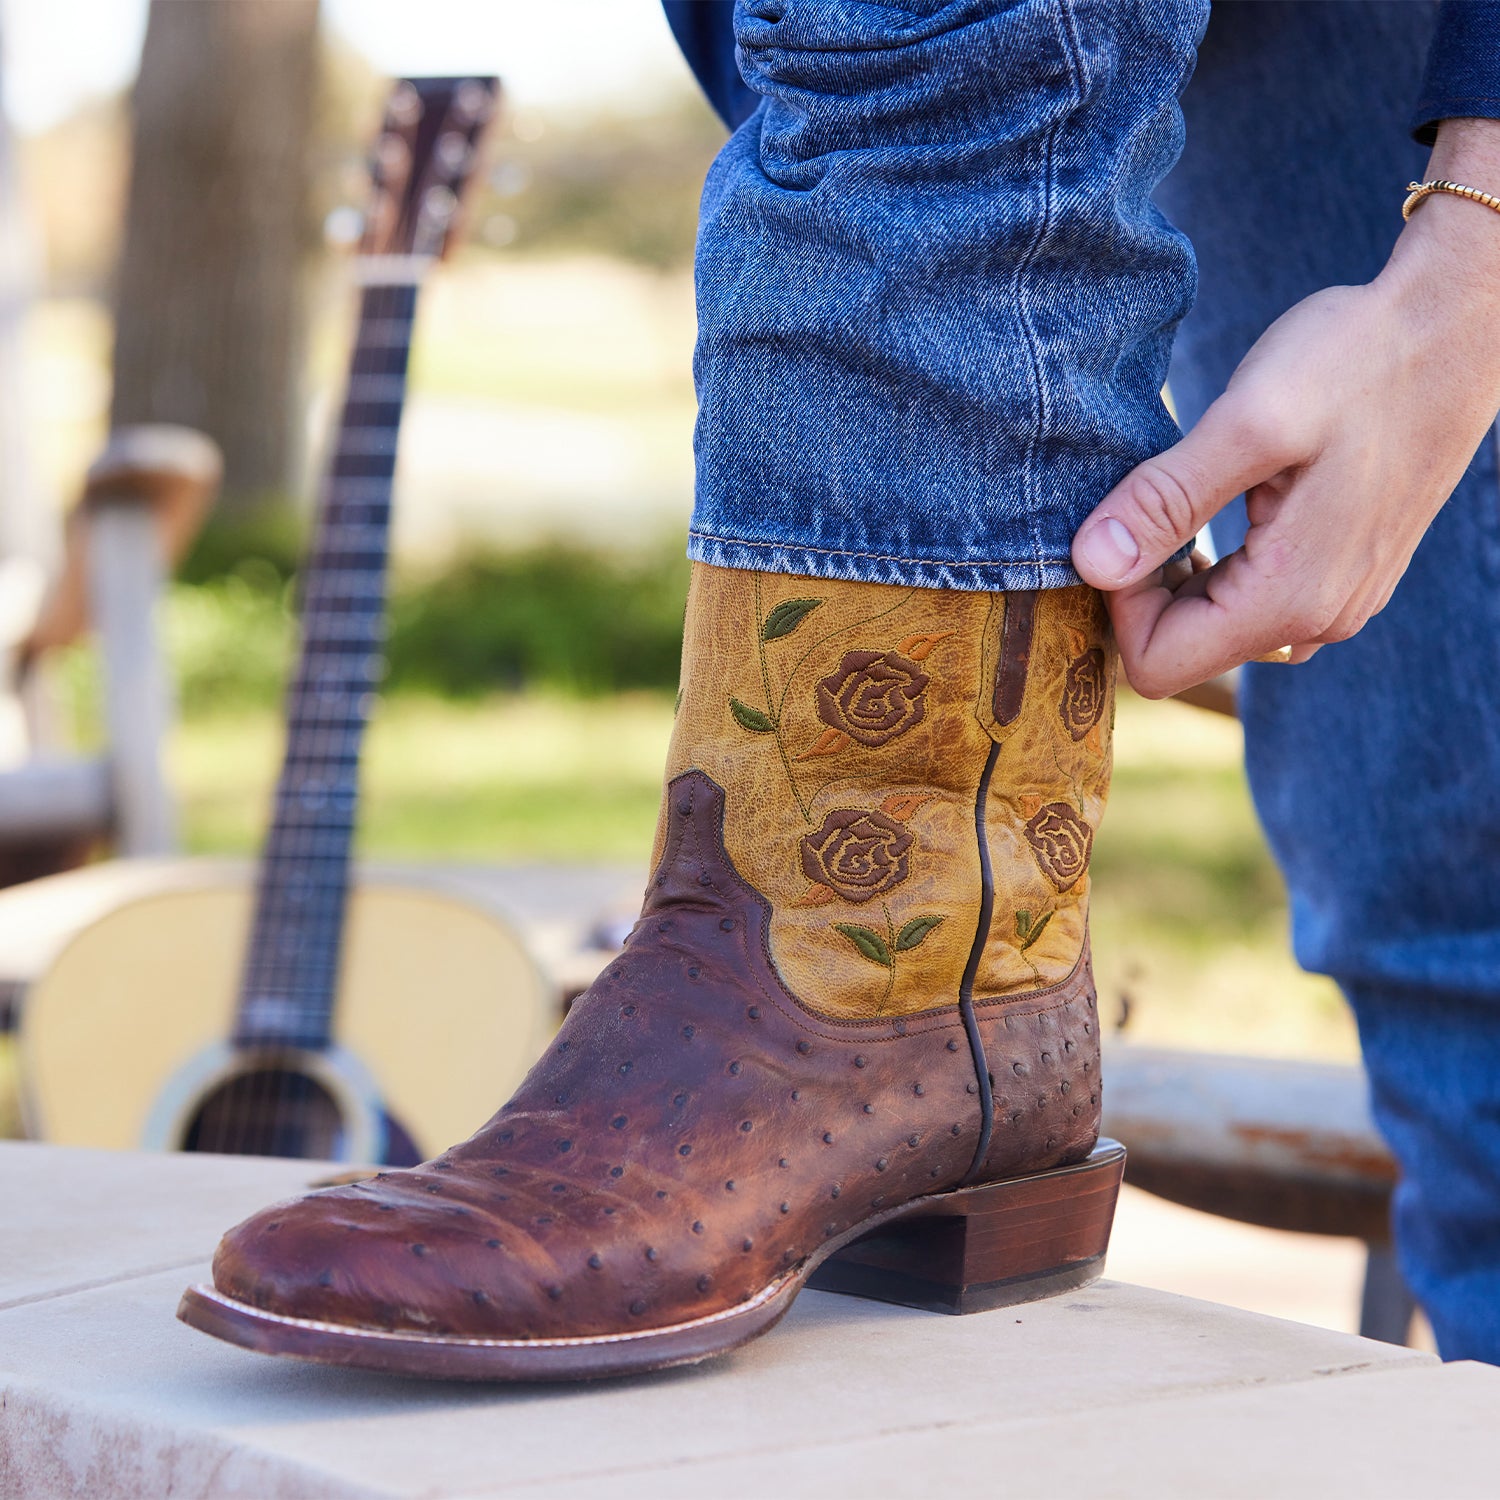 Shop All Mens Boots - Lucchese